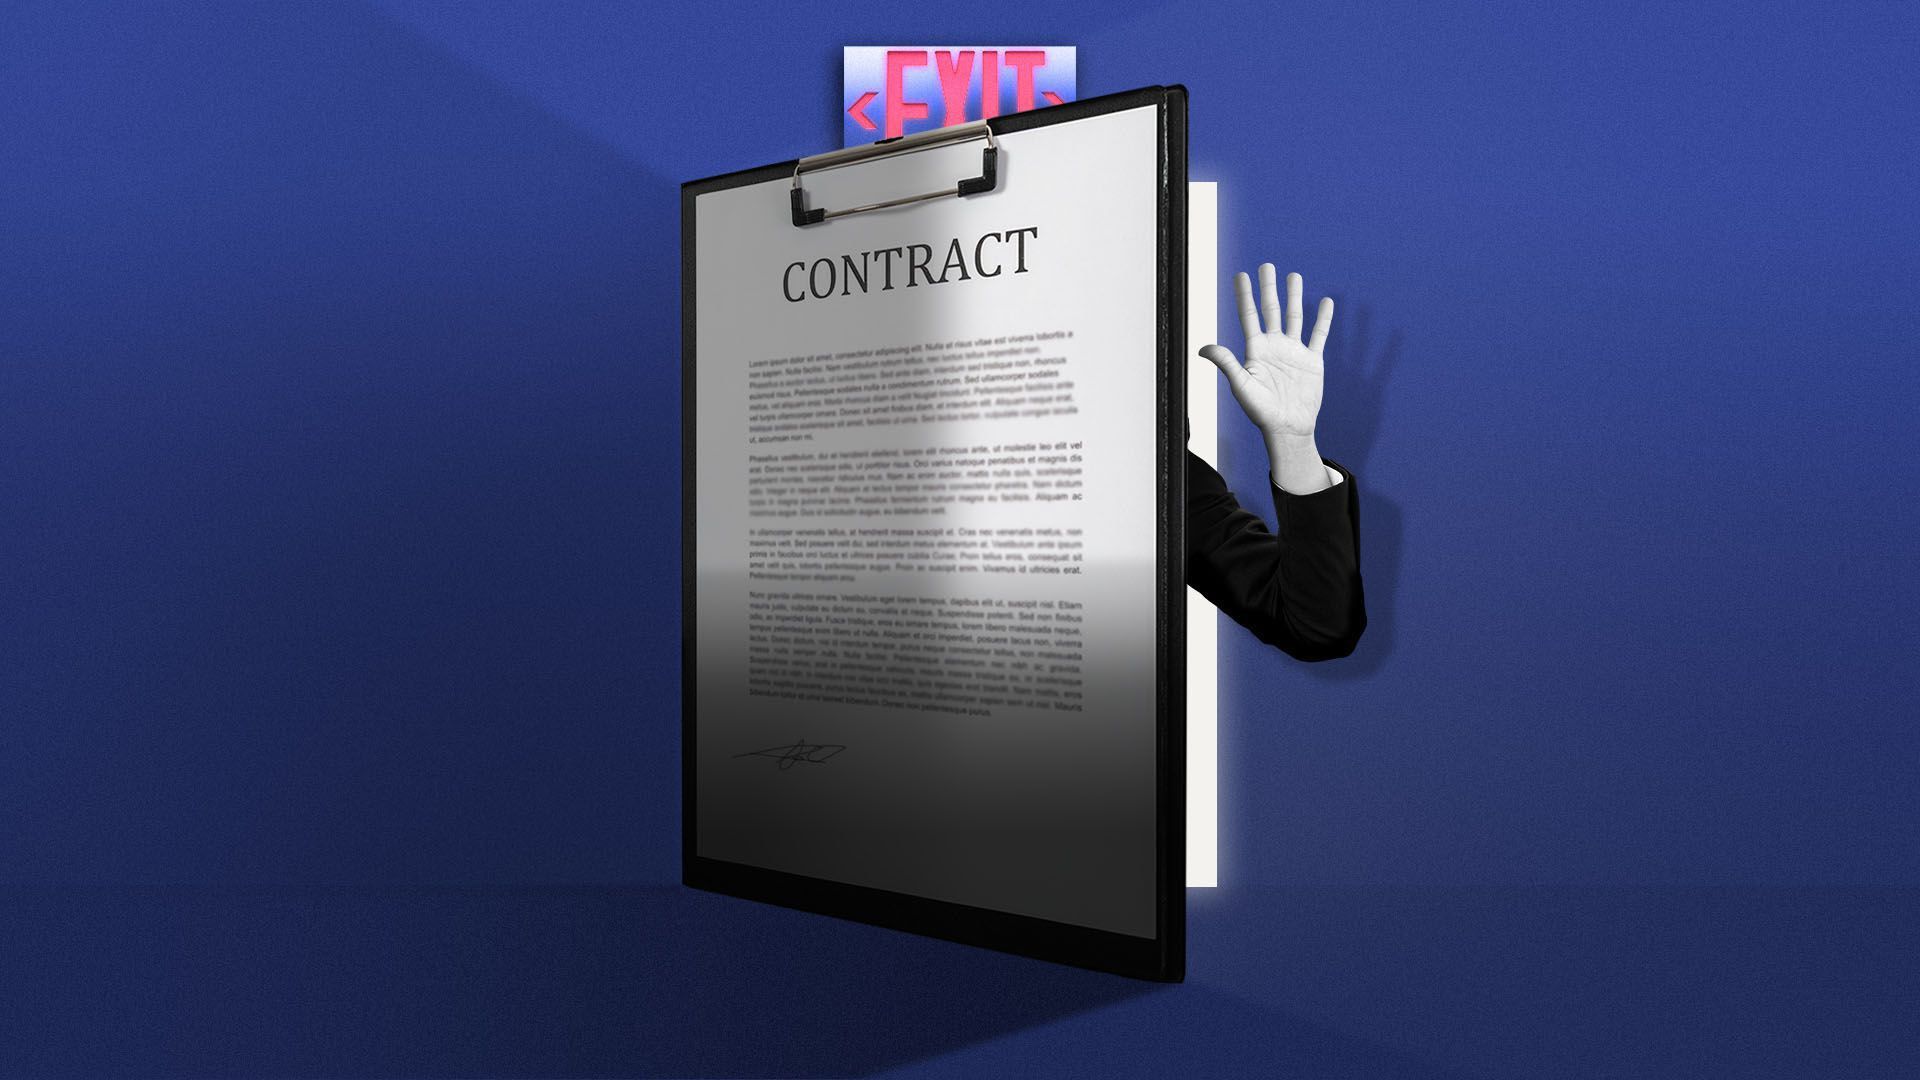 An illustration of a personified contract.